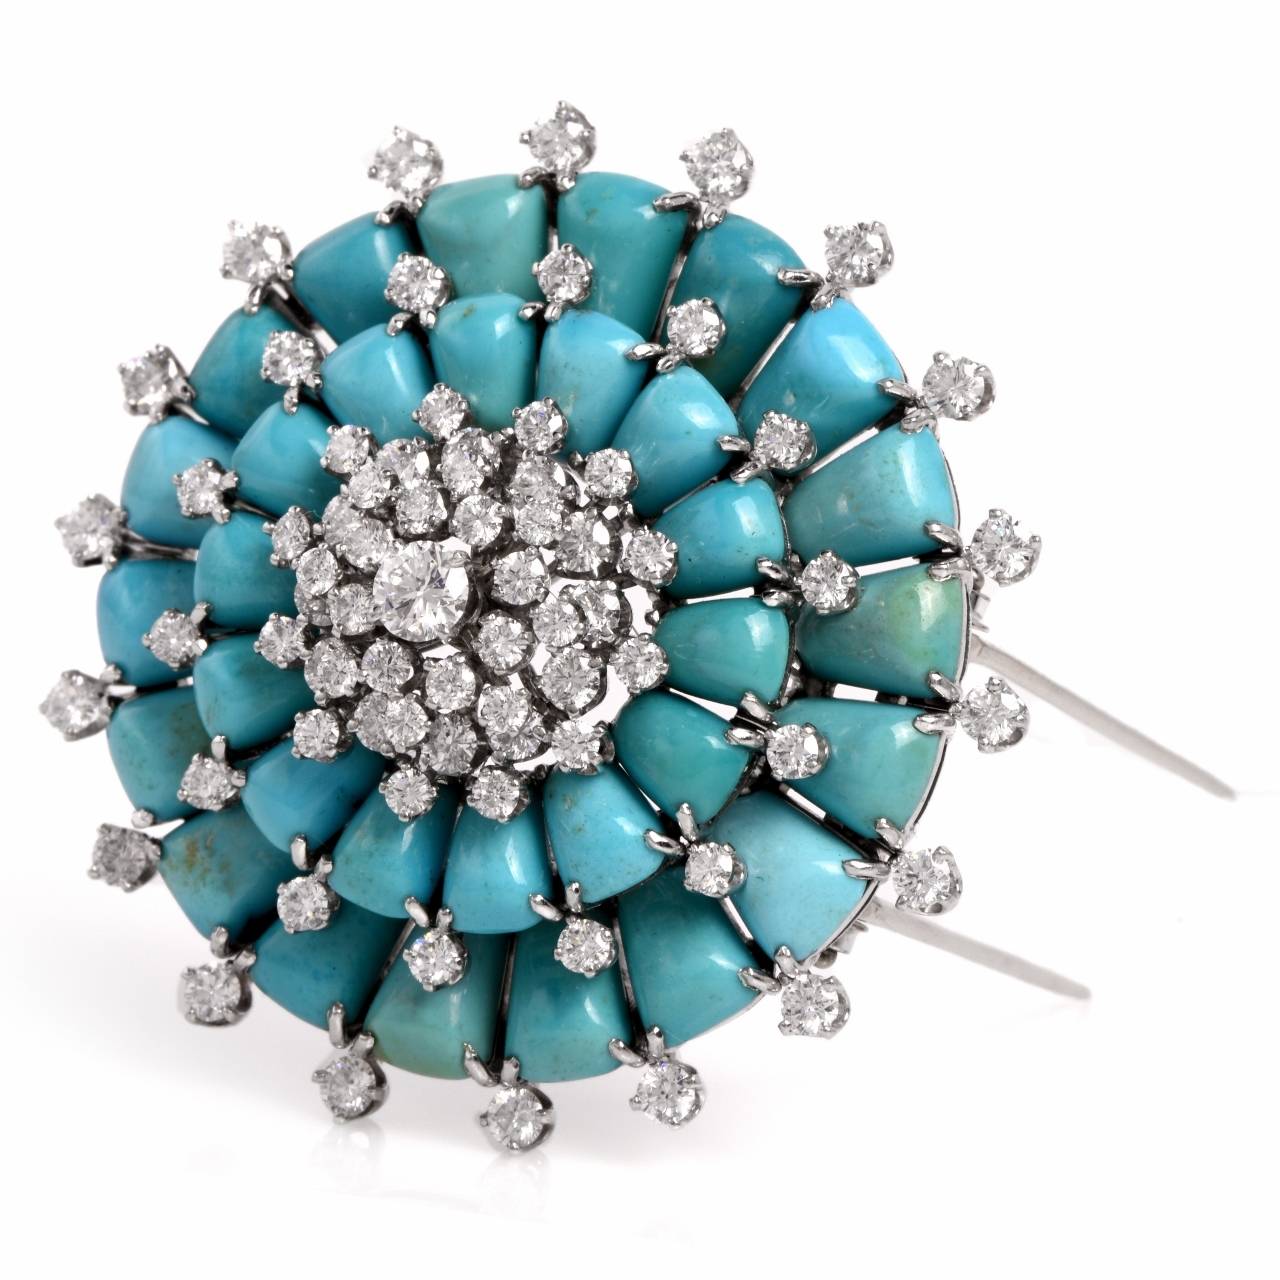 This authentic Van Cleef & Arpels diamond and turquoise lapel brooch of fascinating  aesthetic  is from 1960's vintage era,   crafted in solid platinum, weighing 31.8 grams.  This exquisite circa 1960's VCA brooch of orbicular design incorporates